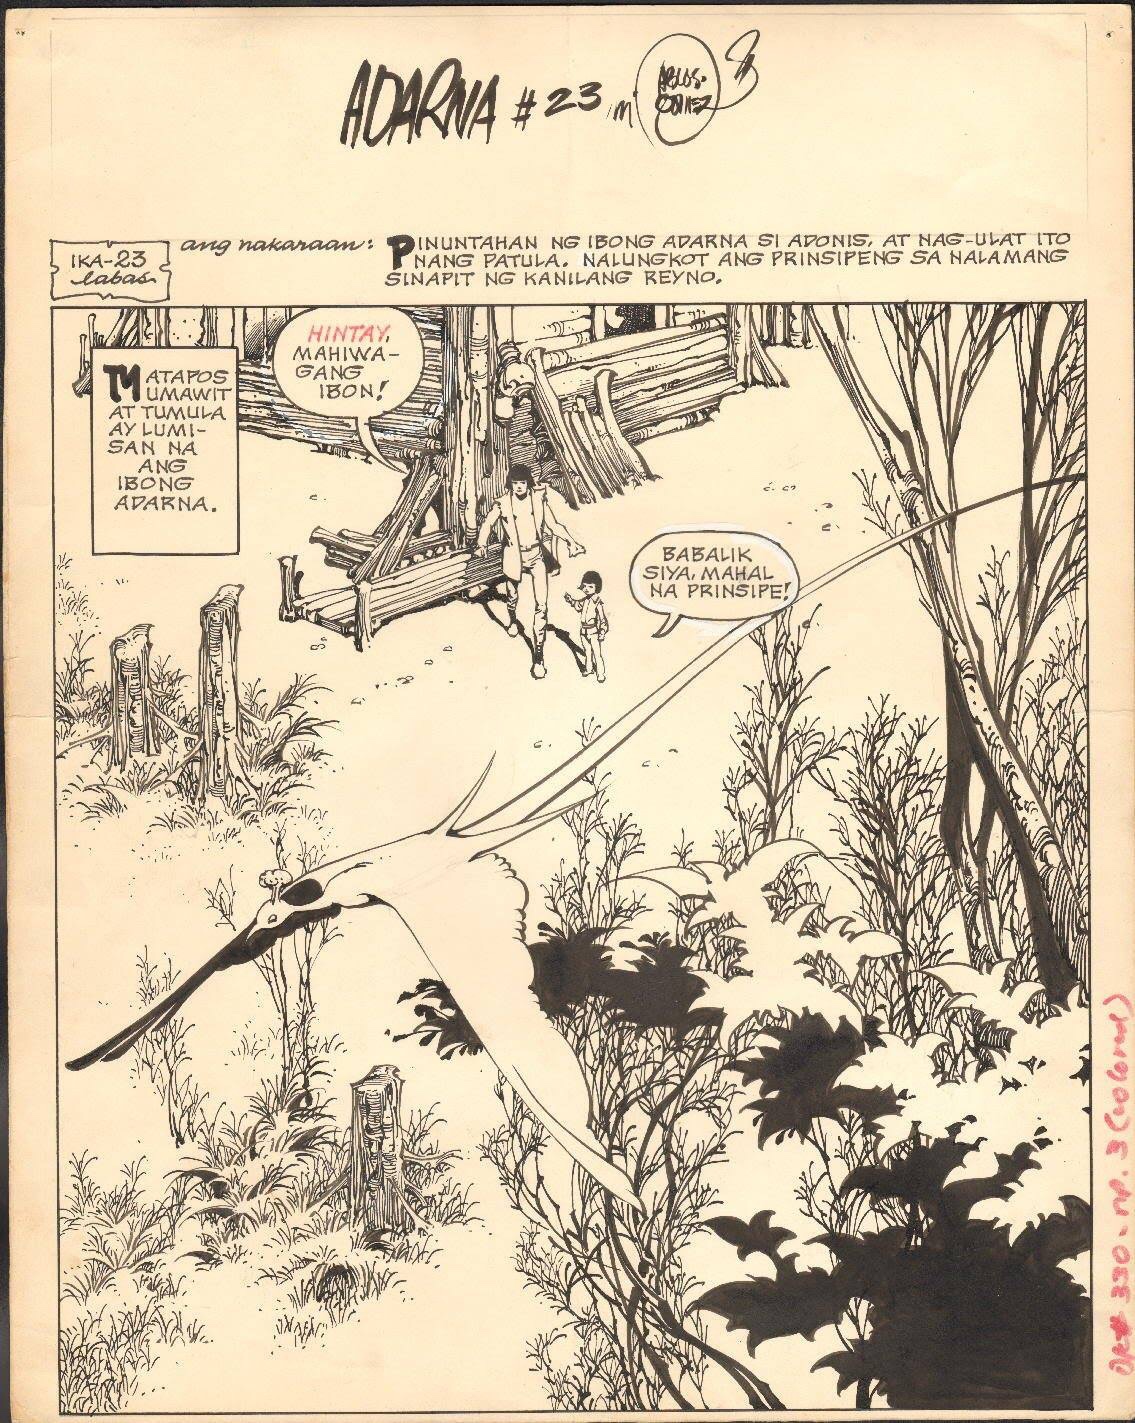 Adarna - 1970s strip published in the Philippines, art by Alex Nino